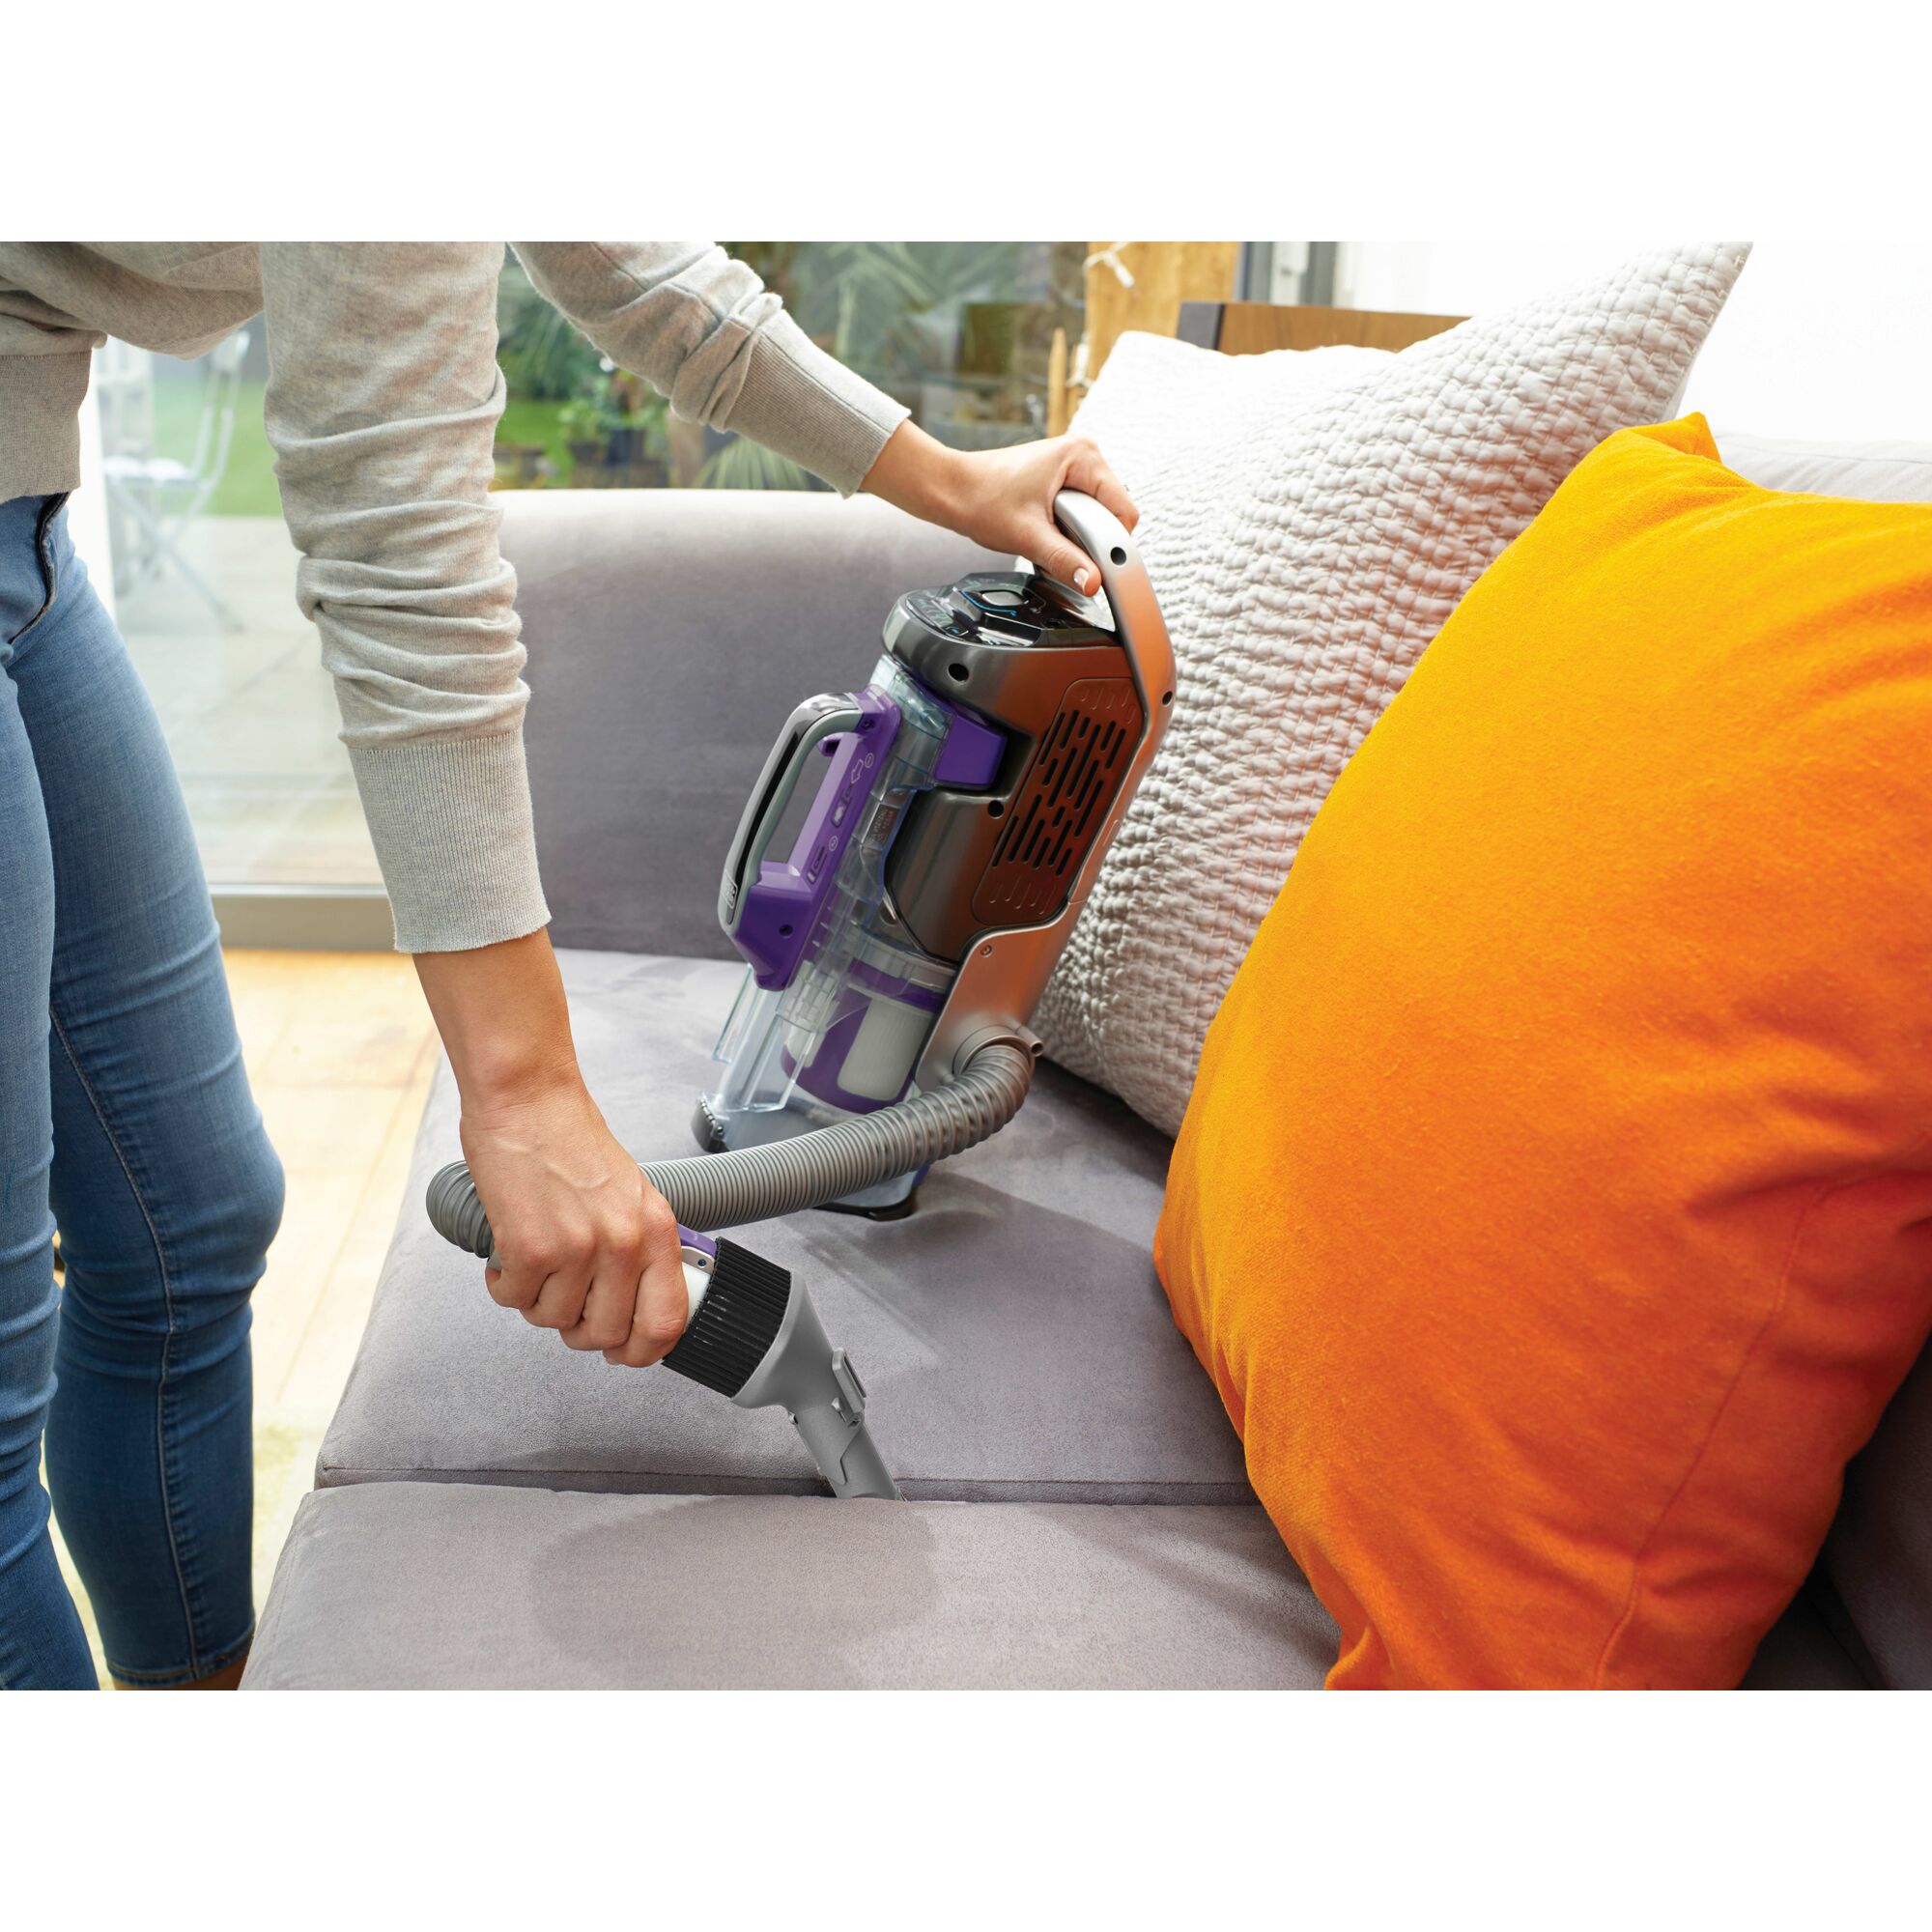 Power Series pro cordless 2 in 1 pet vacuum cleaning sofa.